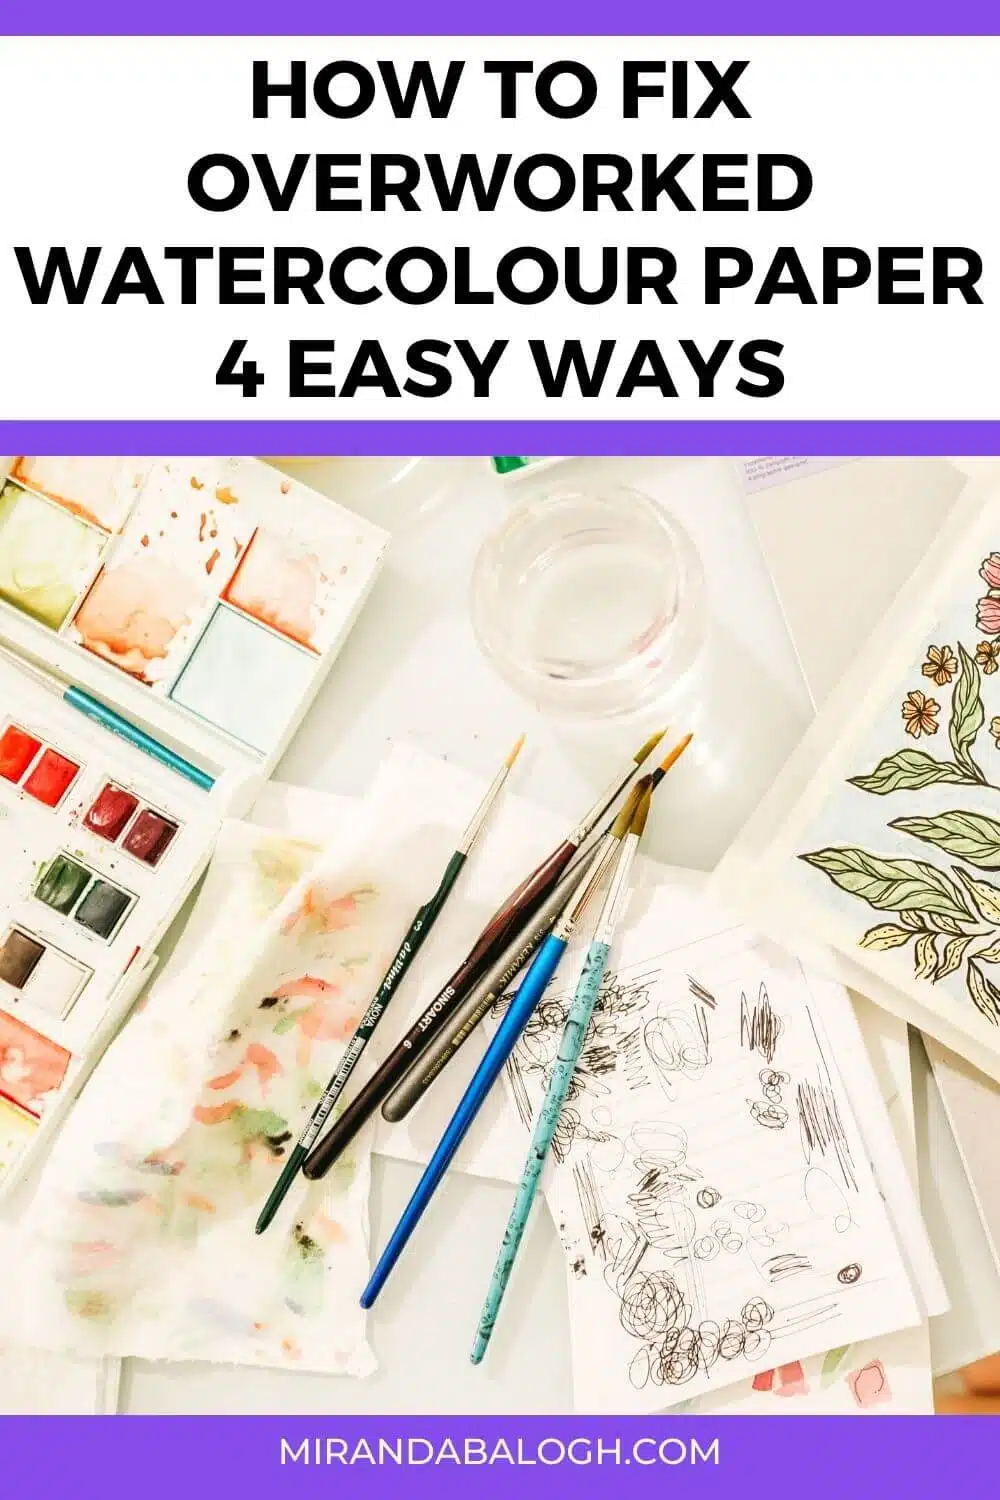 Have you ever wondered how do you fix an overworked watercolour painting? Well, there are 4 easy ways to fix overworked watercolour. First of all, prevention and preparing your paper before you paint are the best solutions. Secondly, check out this article to learn about the three measures you need to take to fix buckled, torn, and peeled watercolour paper.